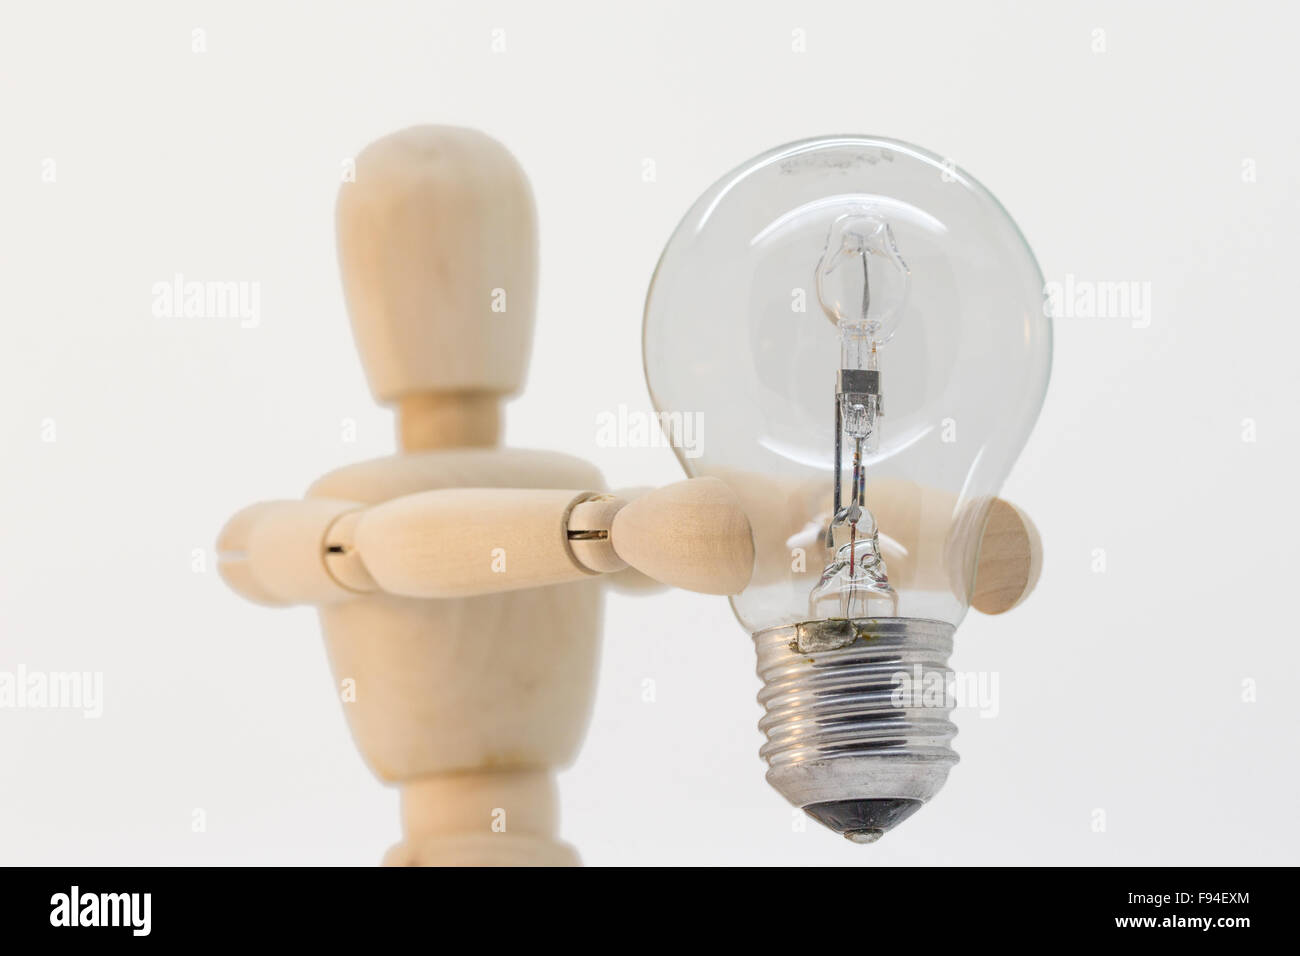 Wooden guy presenting a light bulb that is switched off Stock Photo